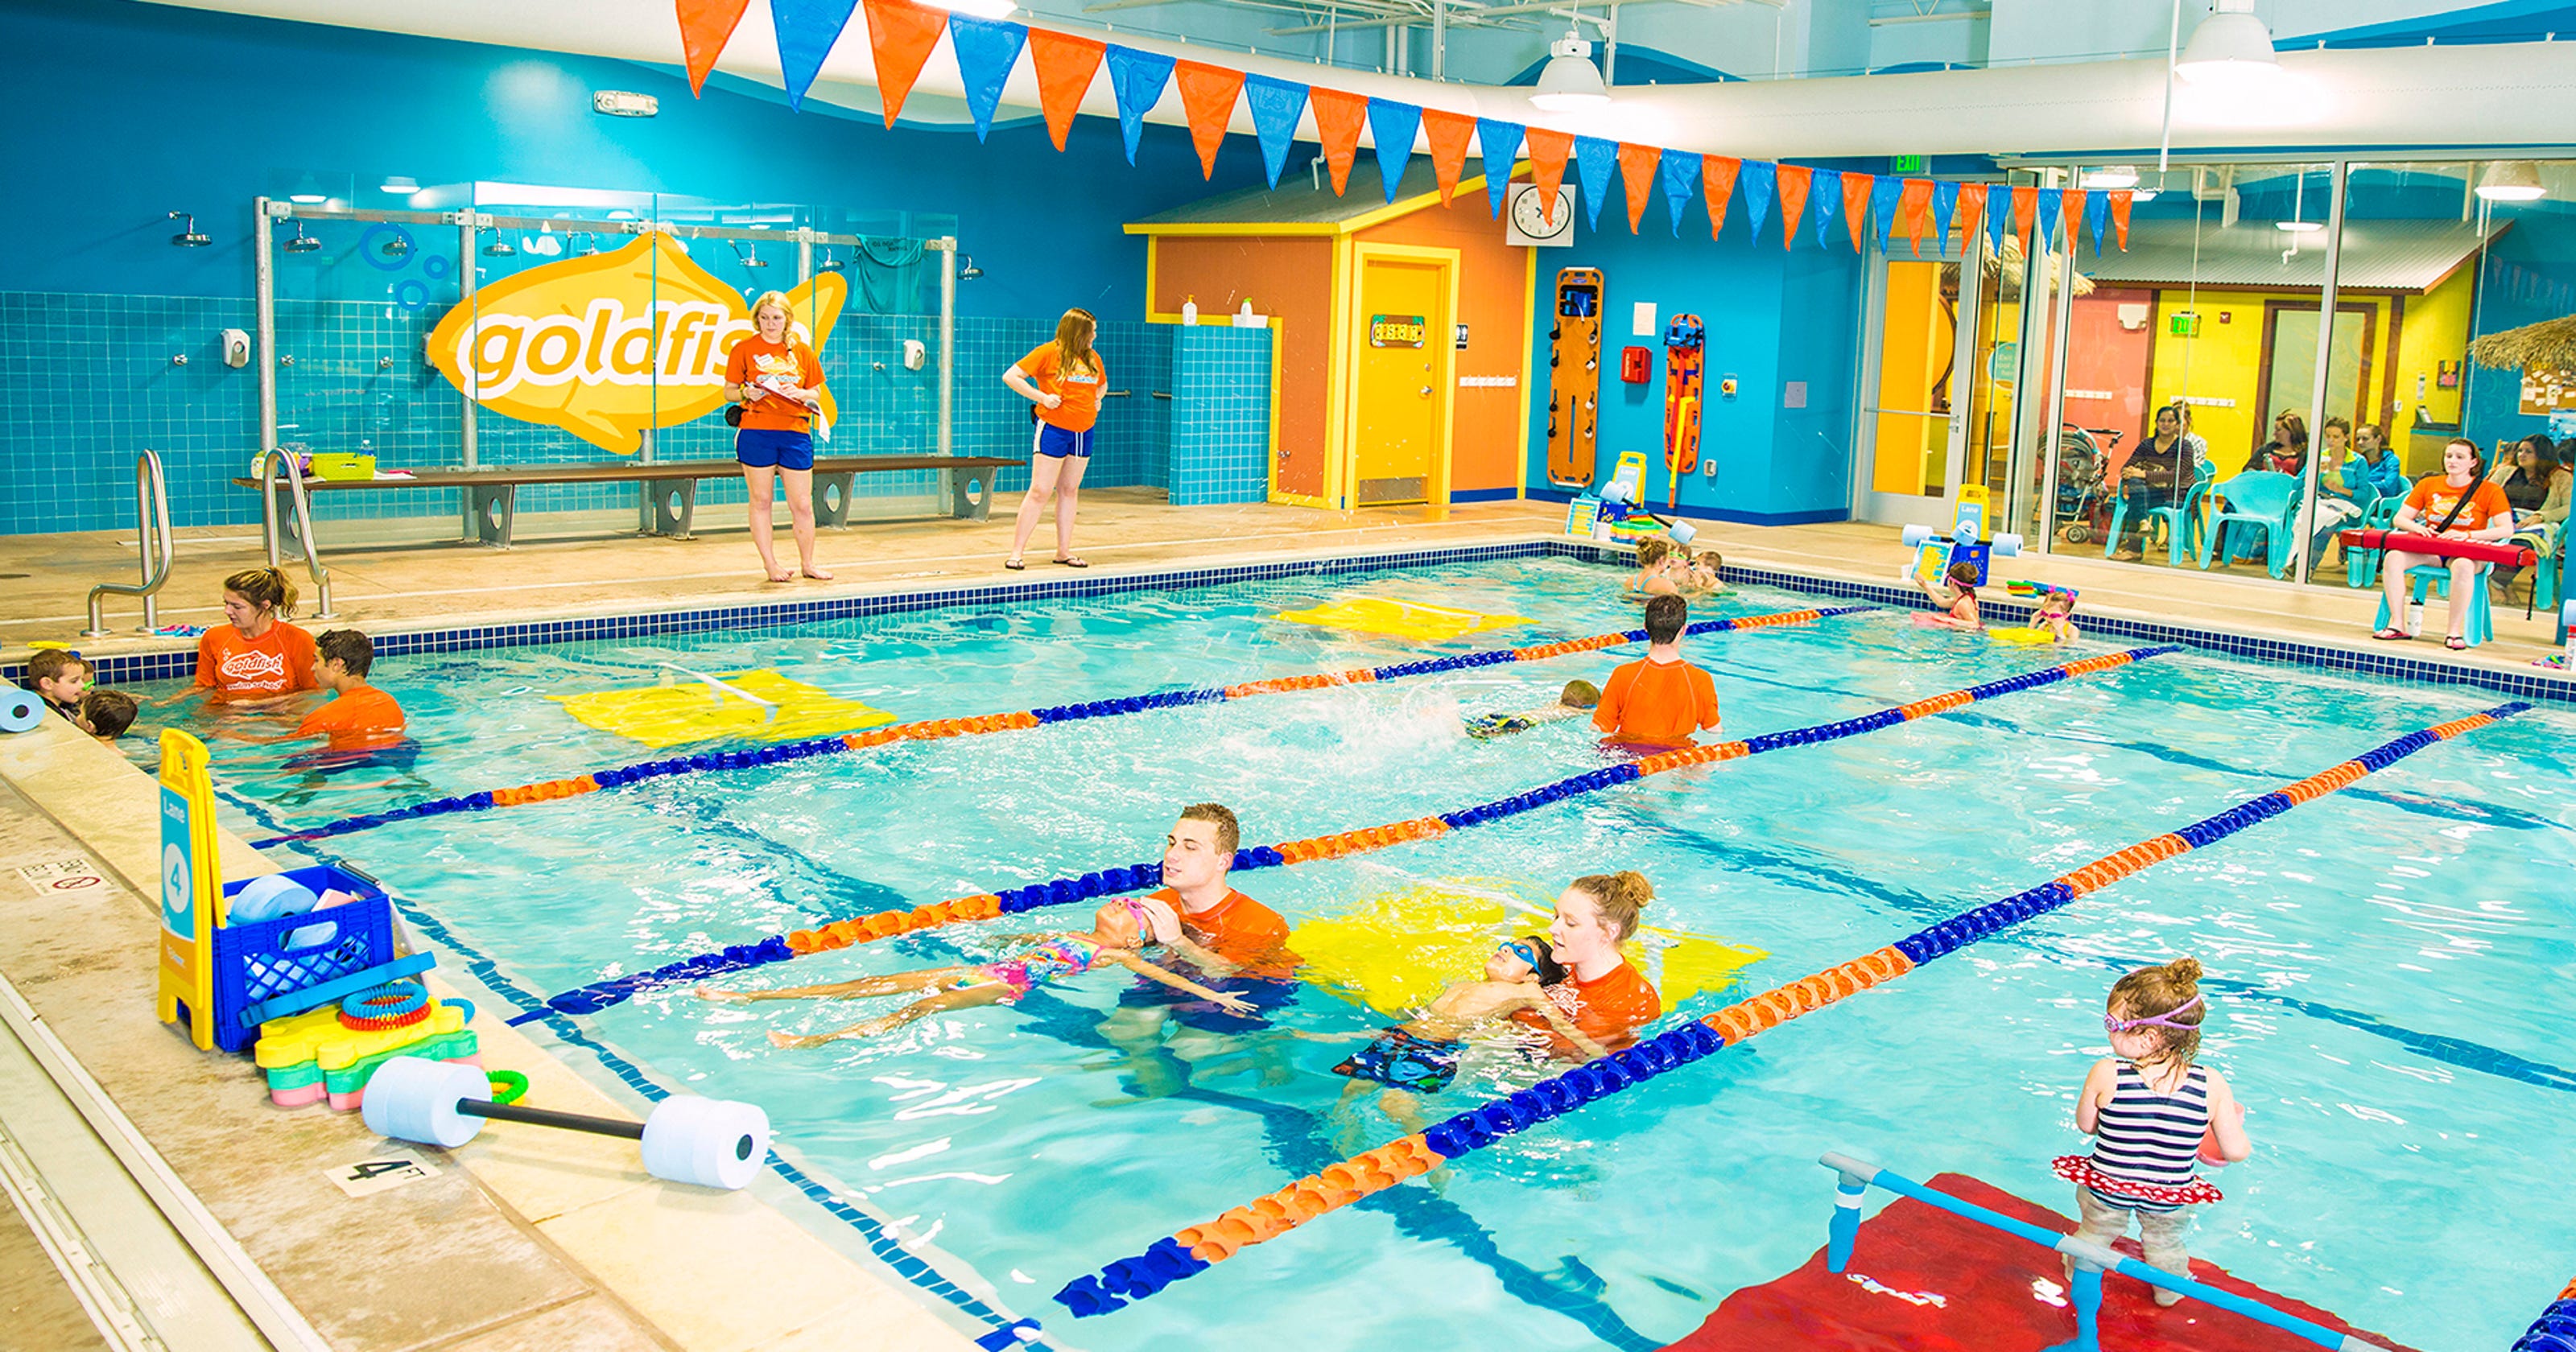 goldfish-swim-school-announces-first-wisconsin-location-will-open-in-brookfield-this-fall